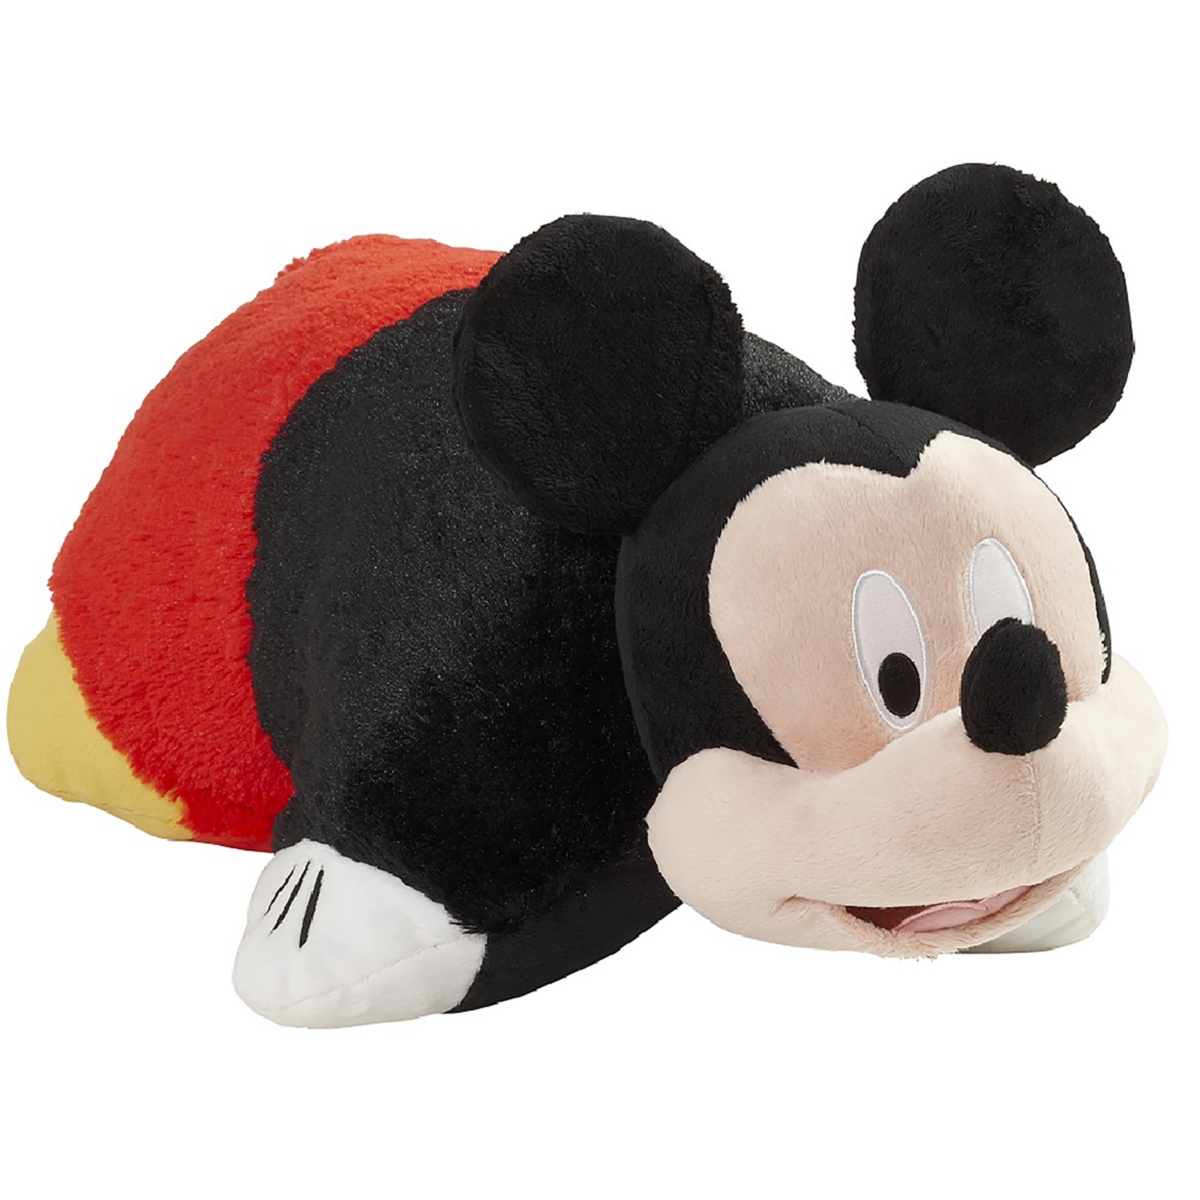 Pillow Pets Kids' Disney Mickey Mouse Stuffed Animal Plush Toy In Medium Red